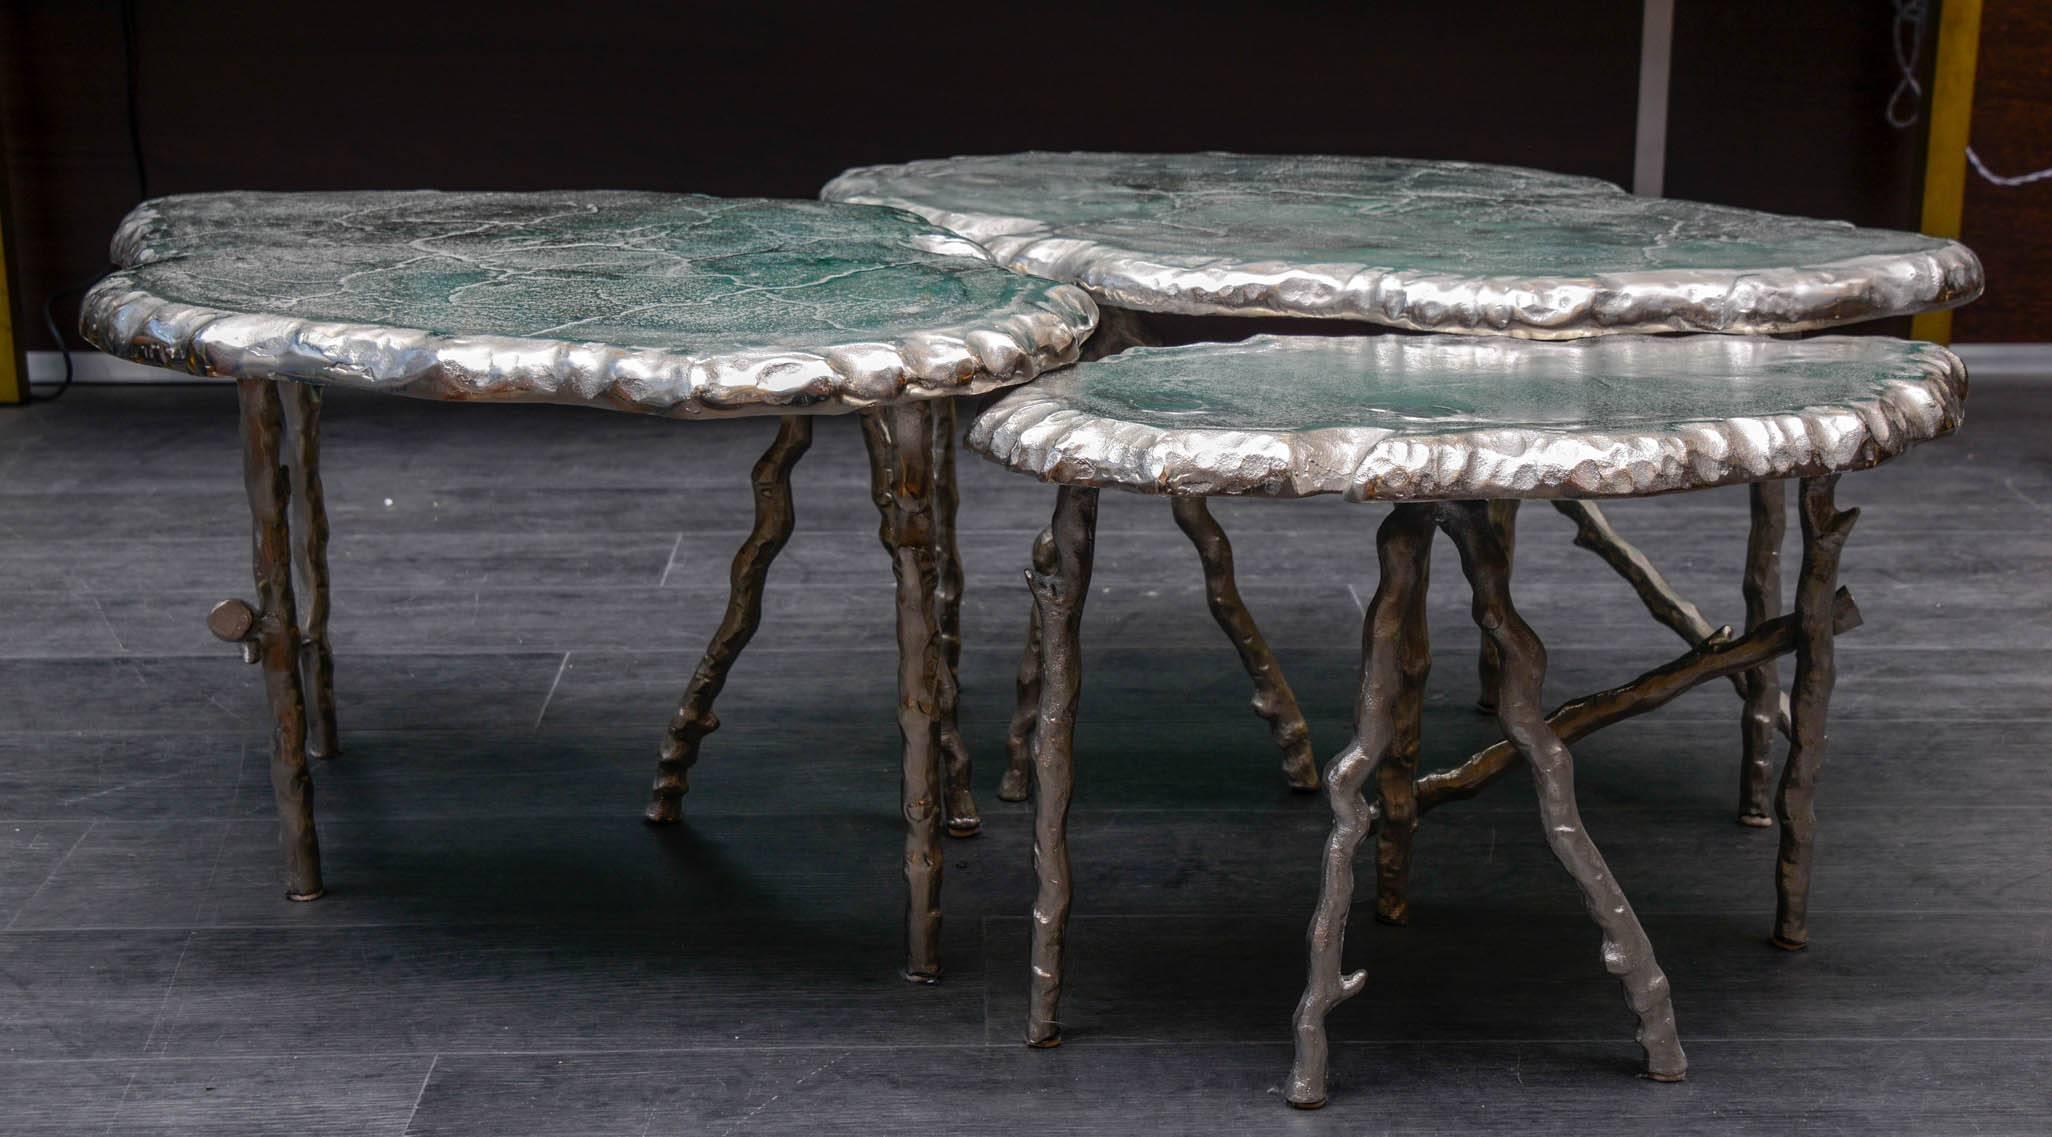 Cast aluminium tables.

Dimensions for the single small one: 53 x 32 x 34 cm.